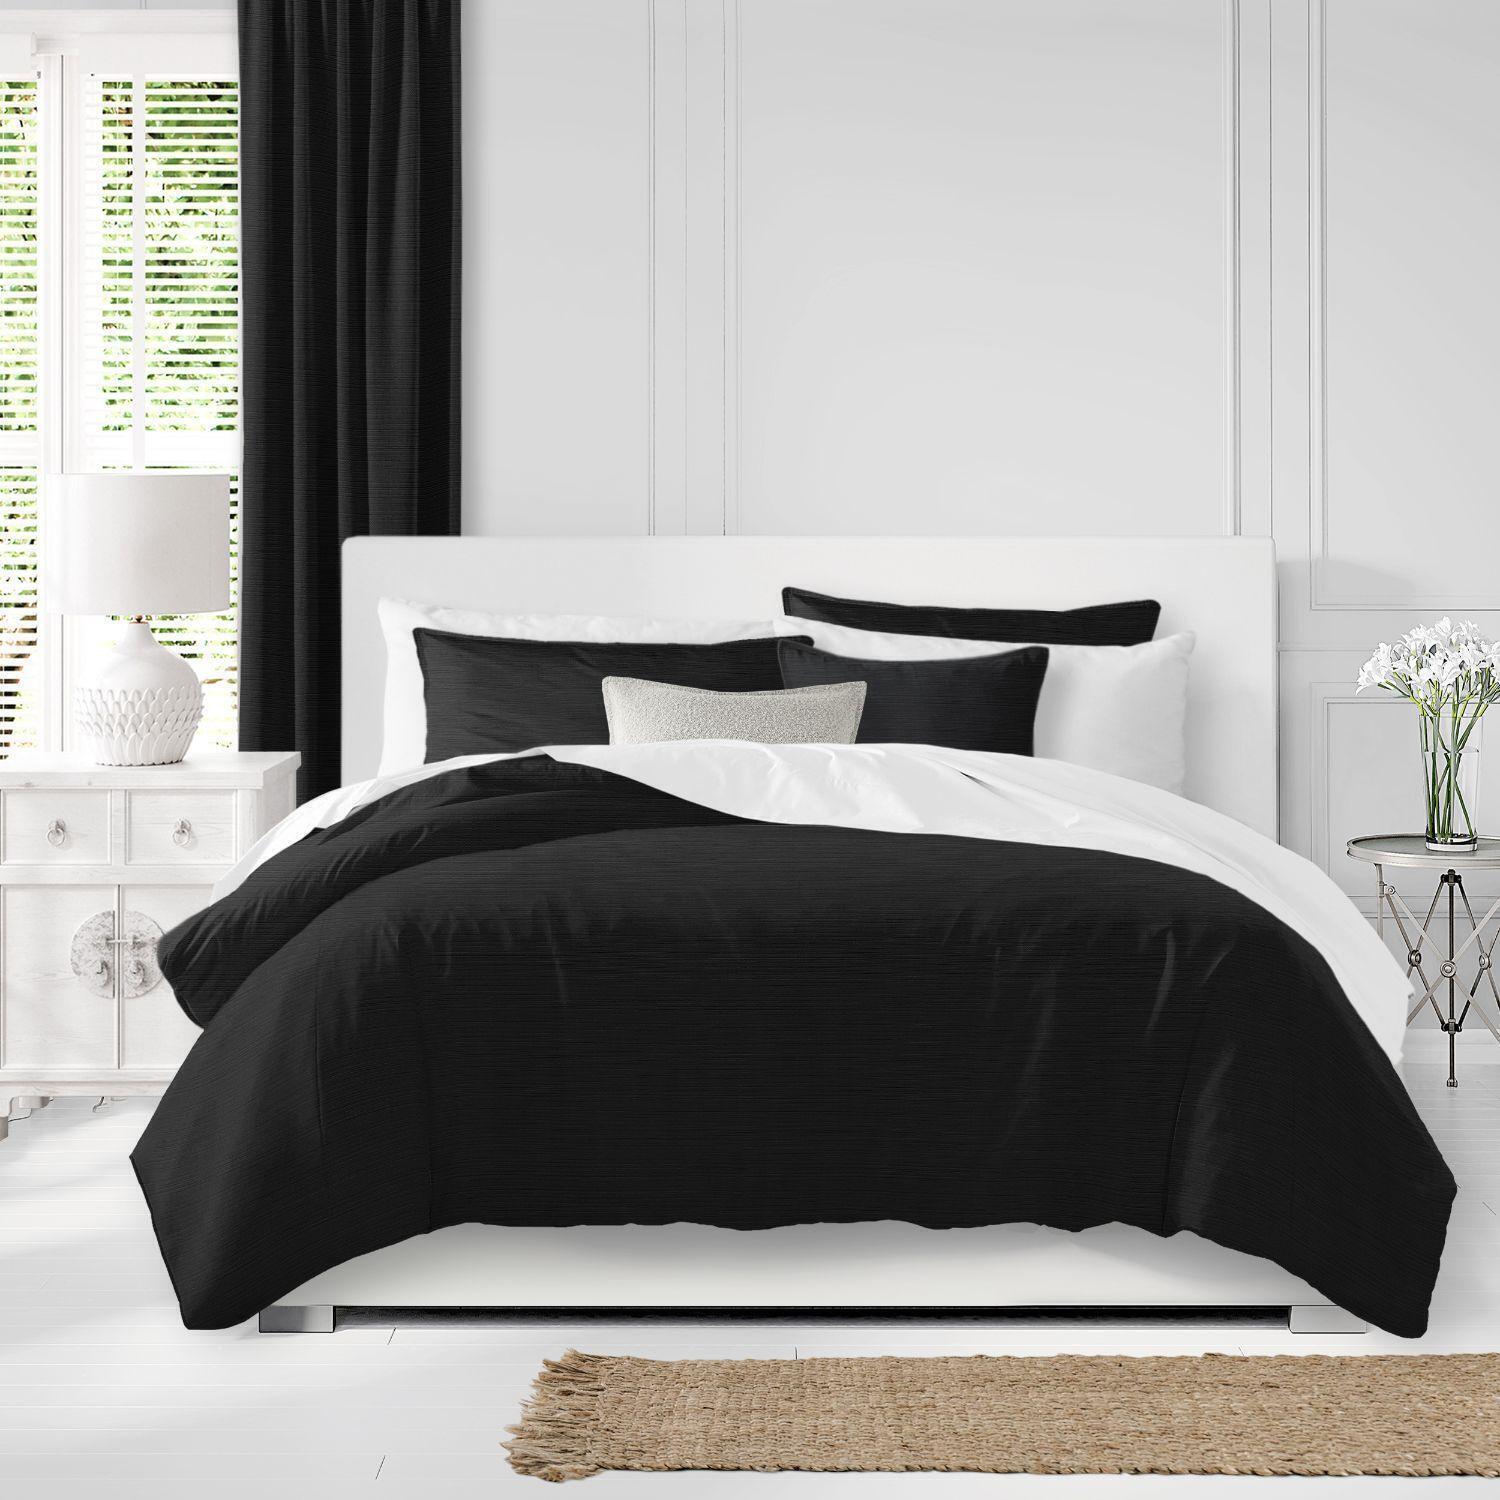 Set of 3 Black Solid Textured Comforter with Pillow Shams - King Size